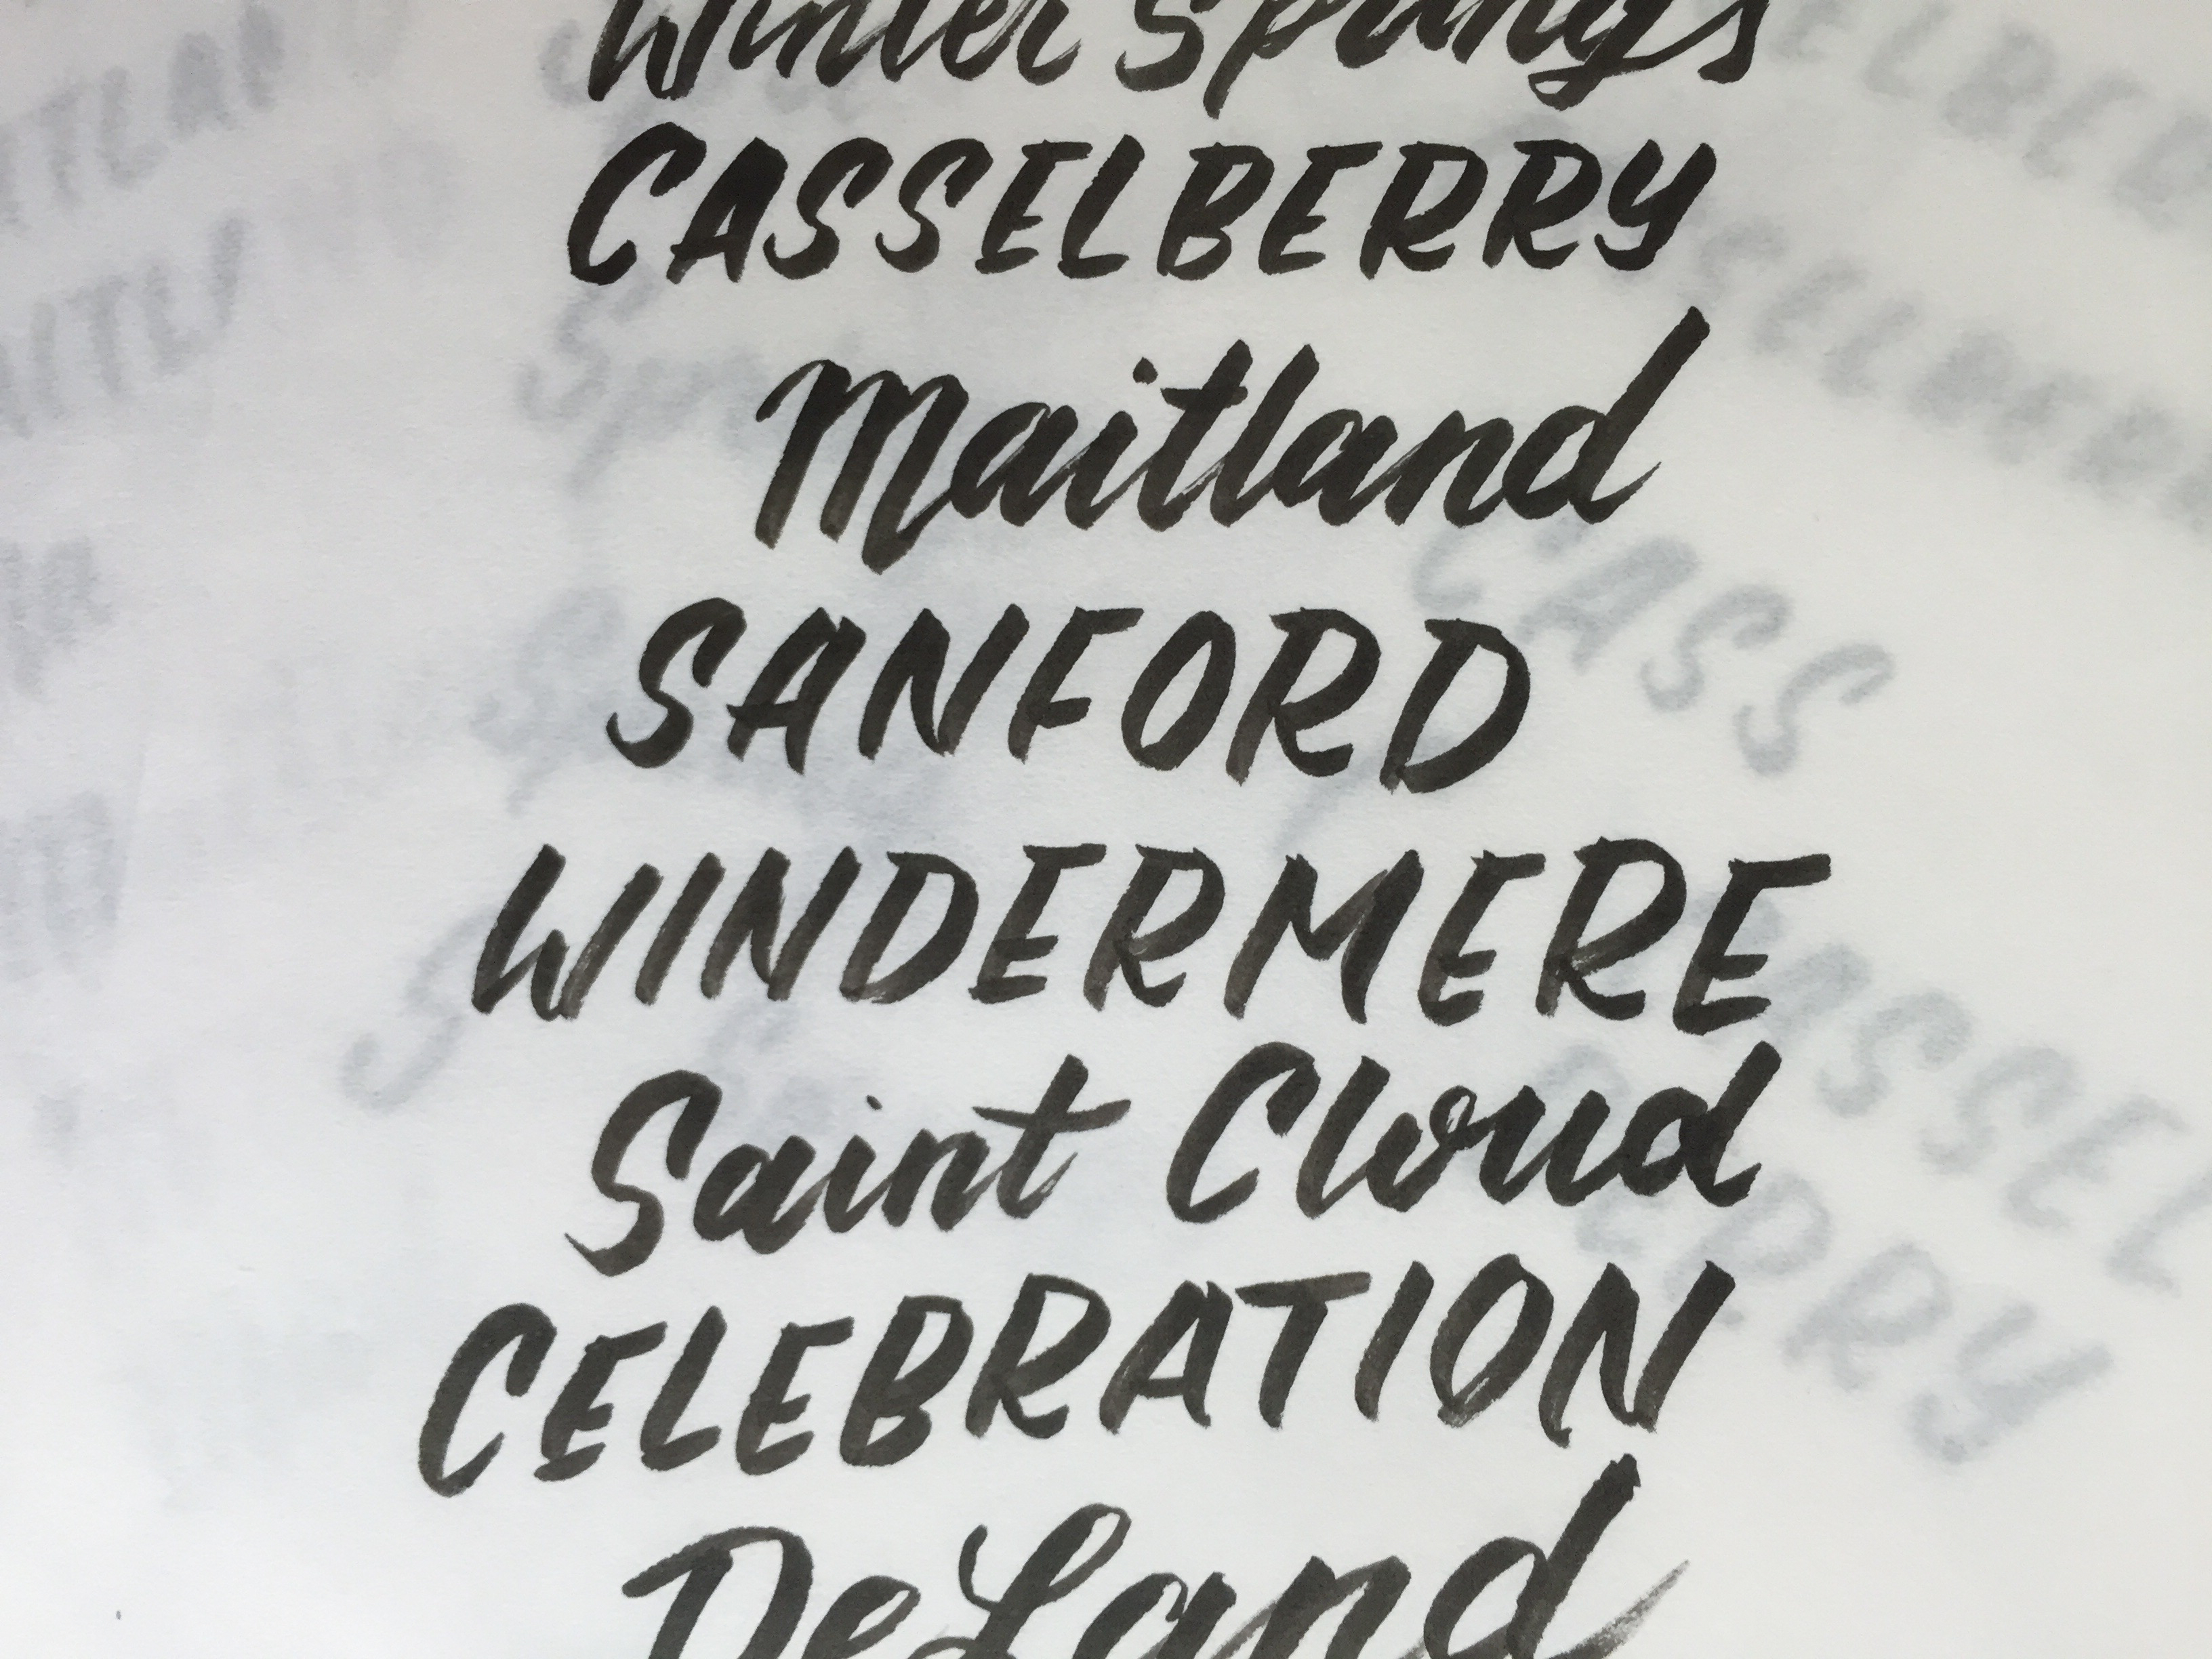 Winter Springs Casselberry Maitland Sanford Windermere Saint Cloud Celebration DeLand hand lettering by Hillery Powers